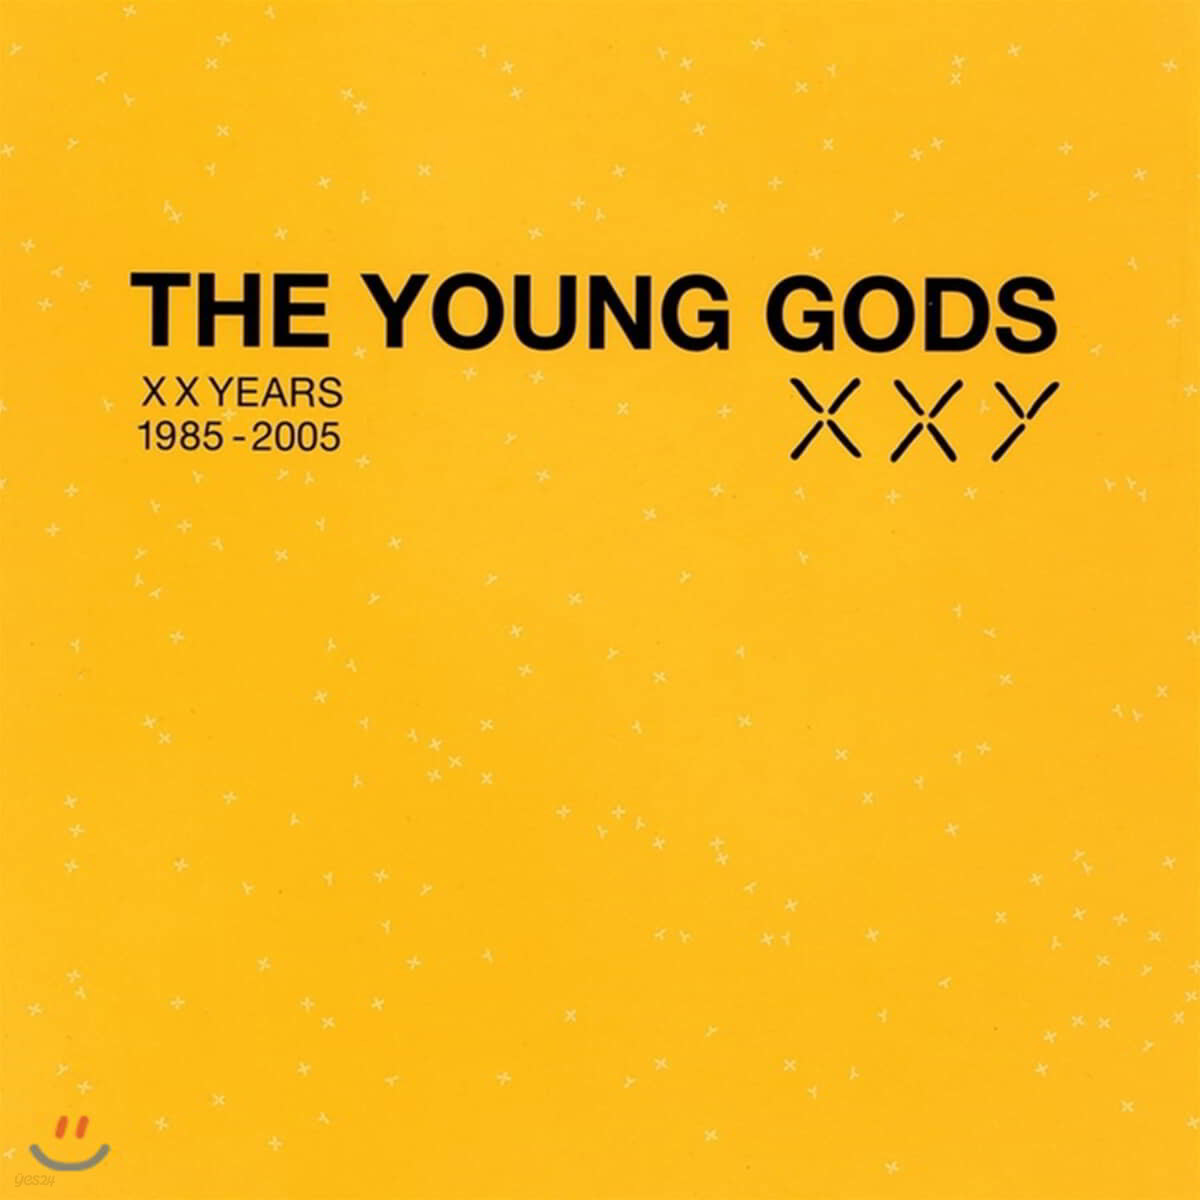 The Young Gods - XXY (XX Years 1985-2005)